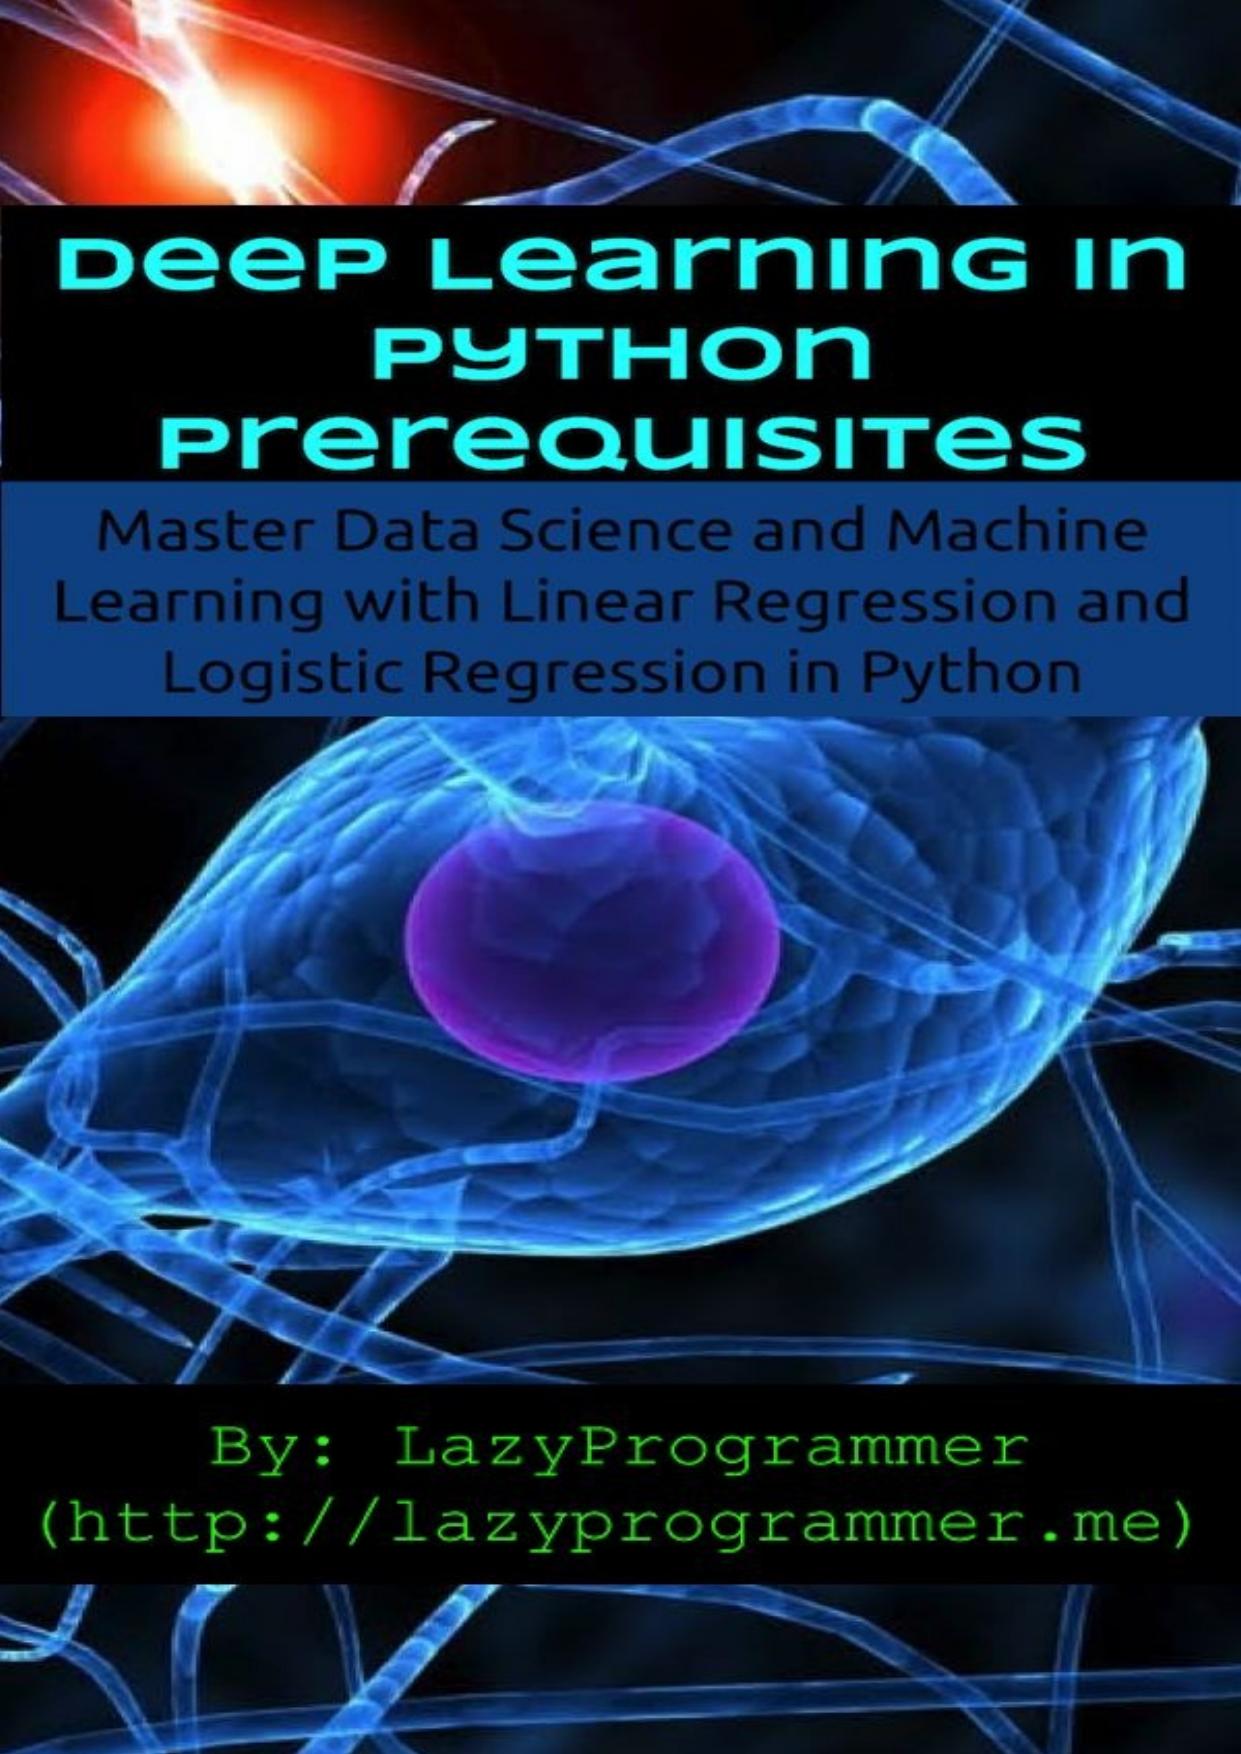 Deep Learning in Python Prerequisites: Master Data Science and Machine Learning with Linear Regression and Logistic Regression in Python (Machine Learning in Python)